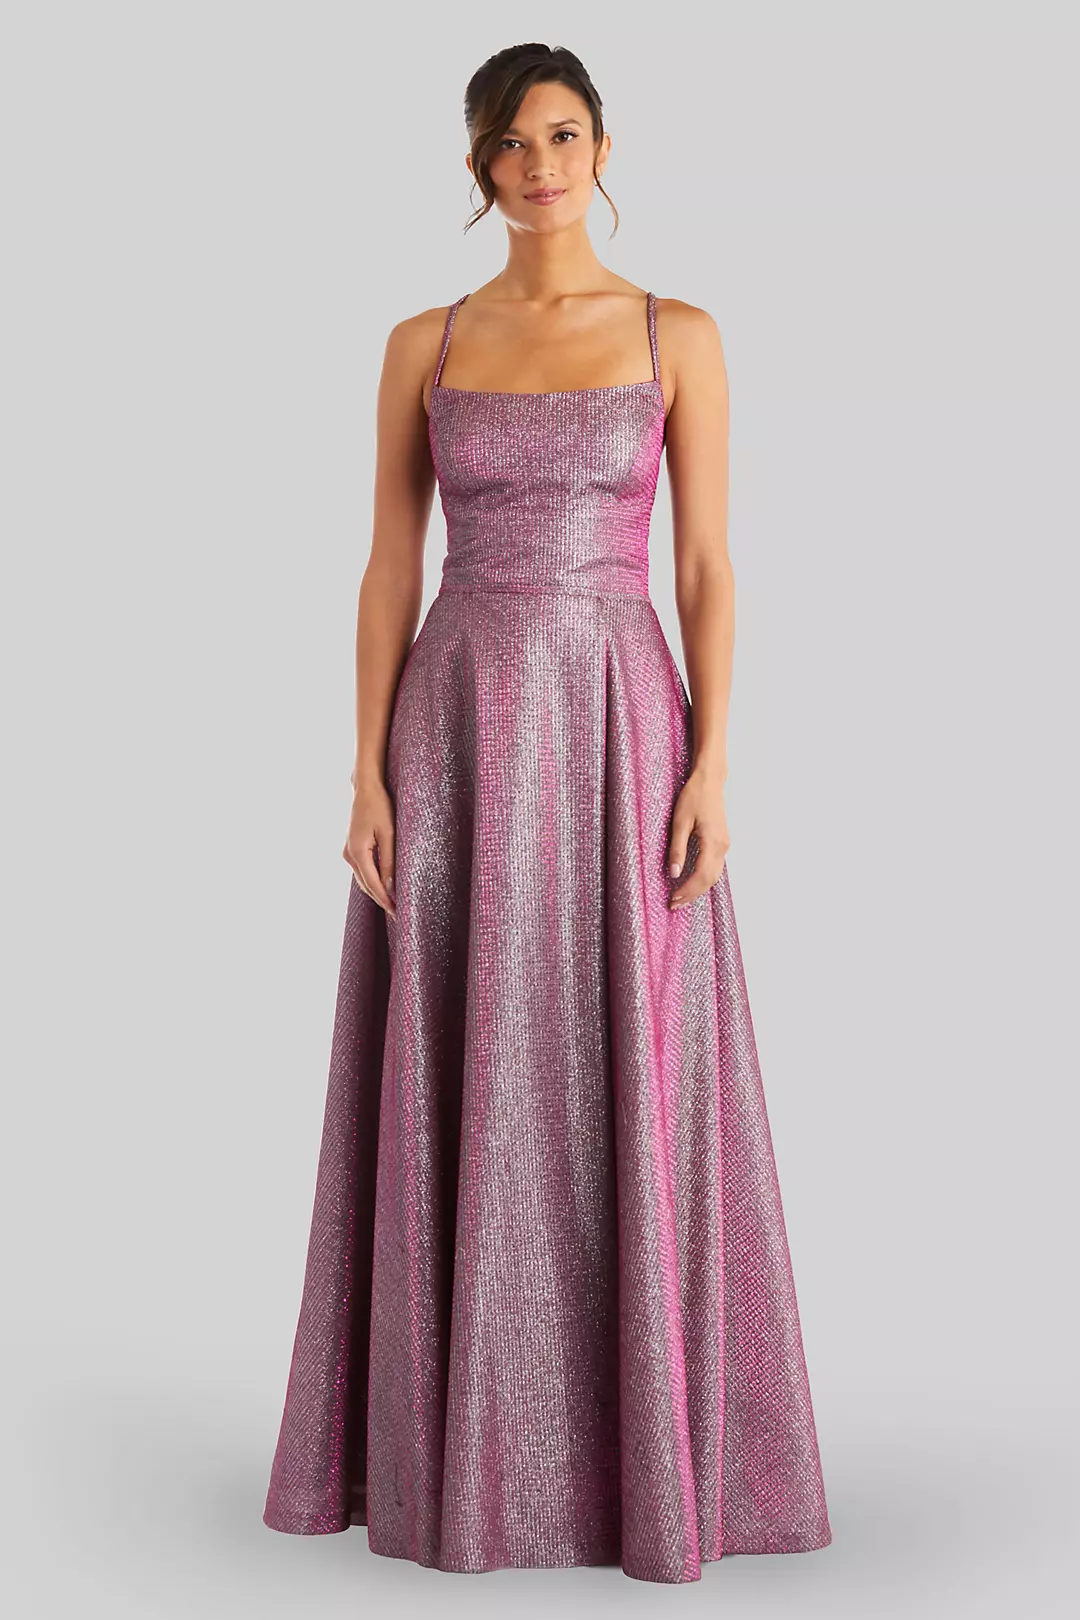 Shimmery Crisscross Ball Gown with Back Cutouts Image